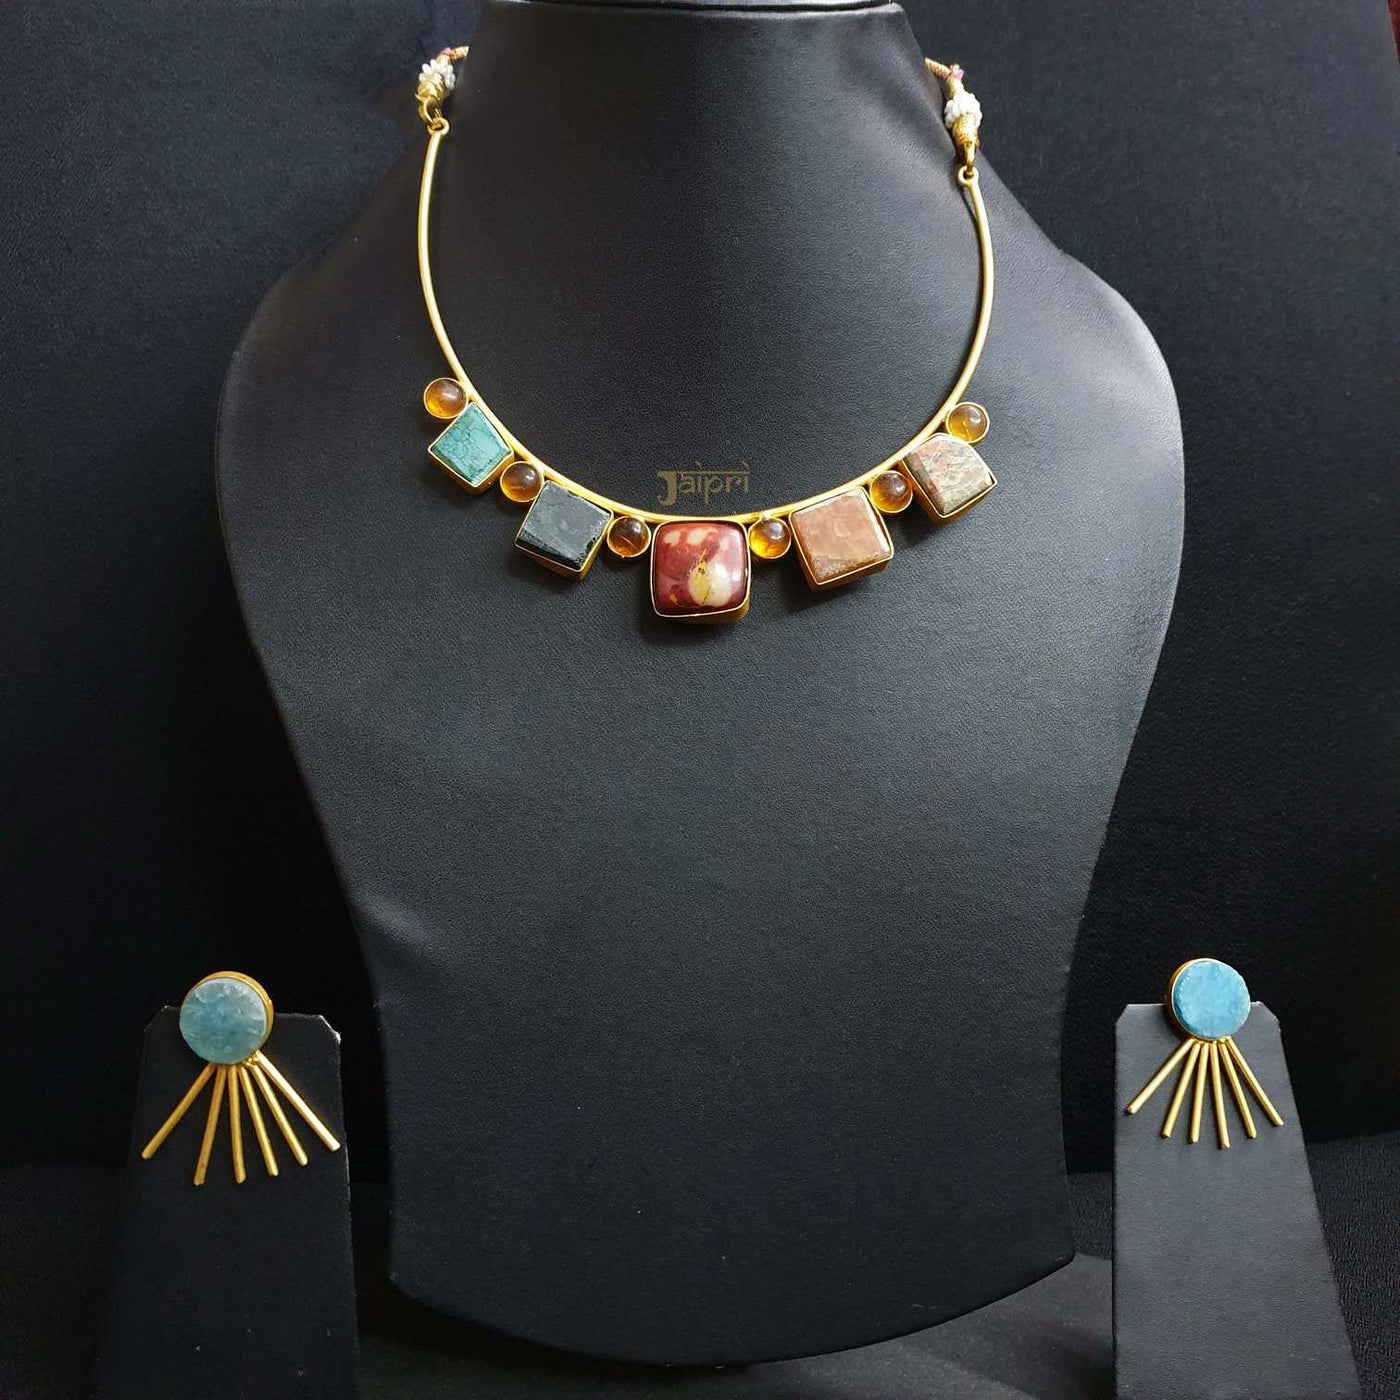 Designer Multicolor Gold Choker Necklace With Earrings